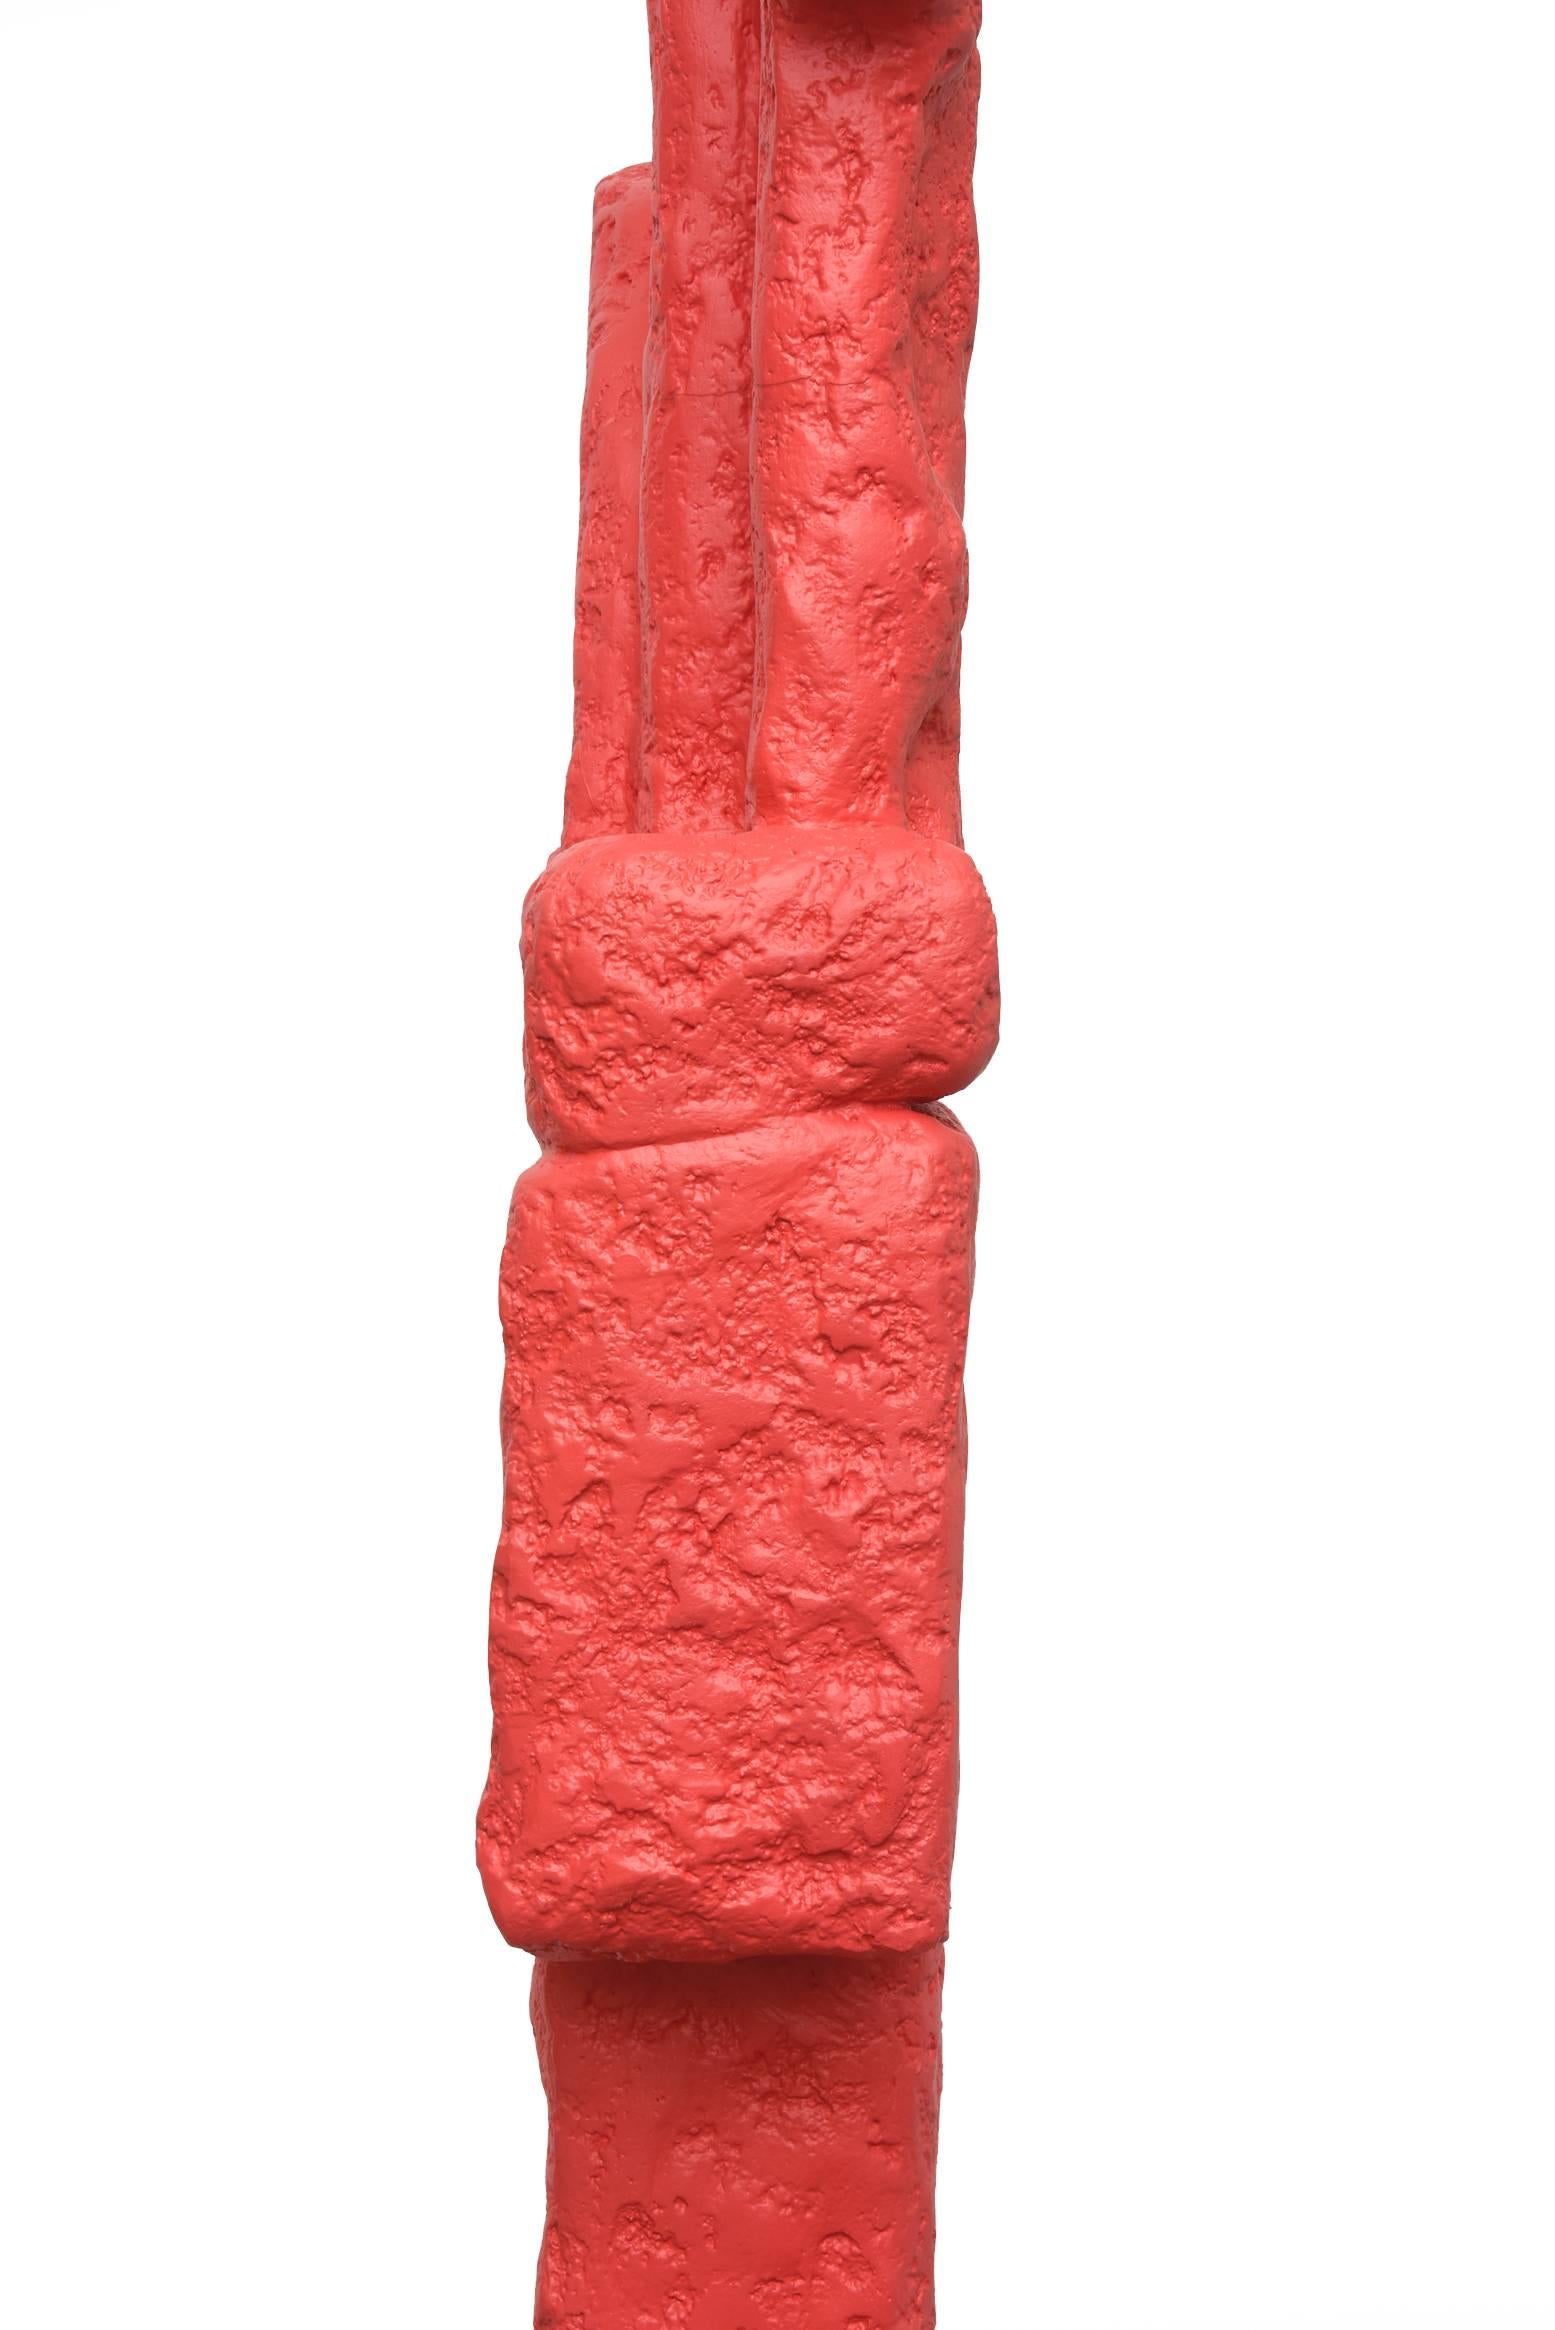 Plaster of Paris and Resin Red Abstract Totem Floor Indoor Sculpture In Good Condition For Sale In North Miami, FL